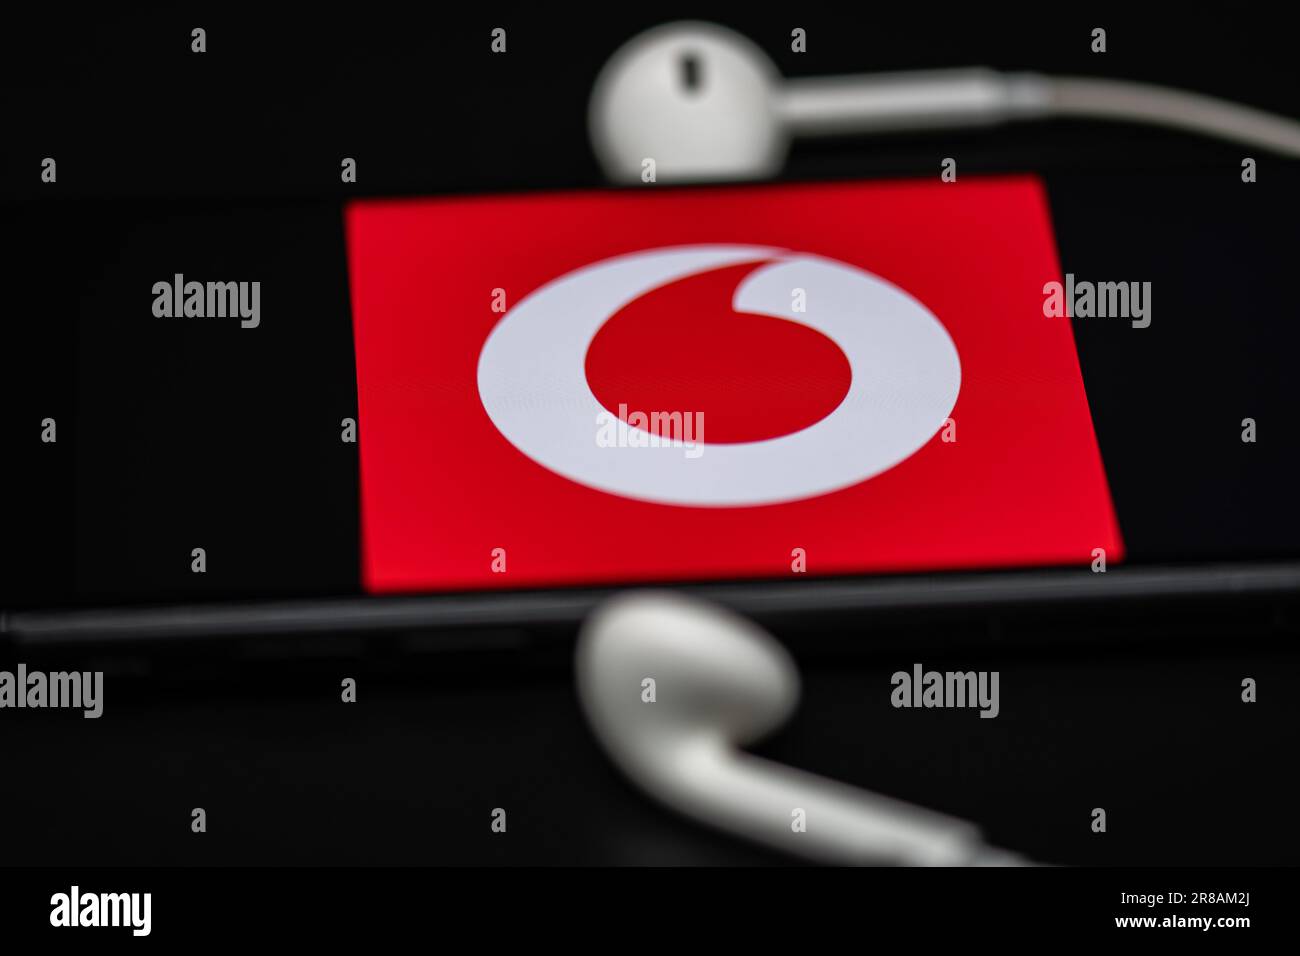 Rheinbach, Germany  20 June 2023, The brand logo of the mobile phone company 'Vodafone' on the display of a smartphone (focus on the brand logo) Stock Photo